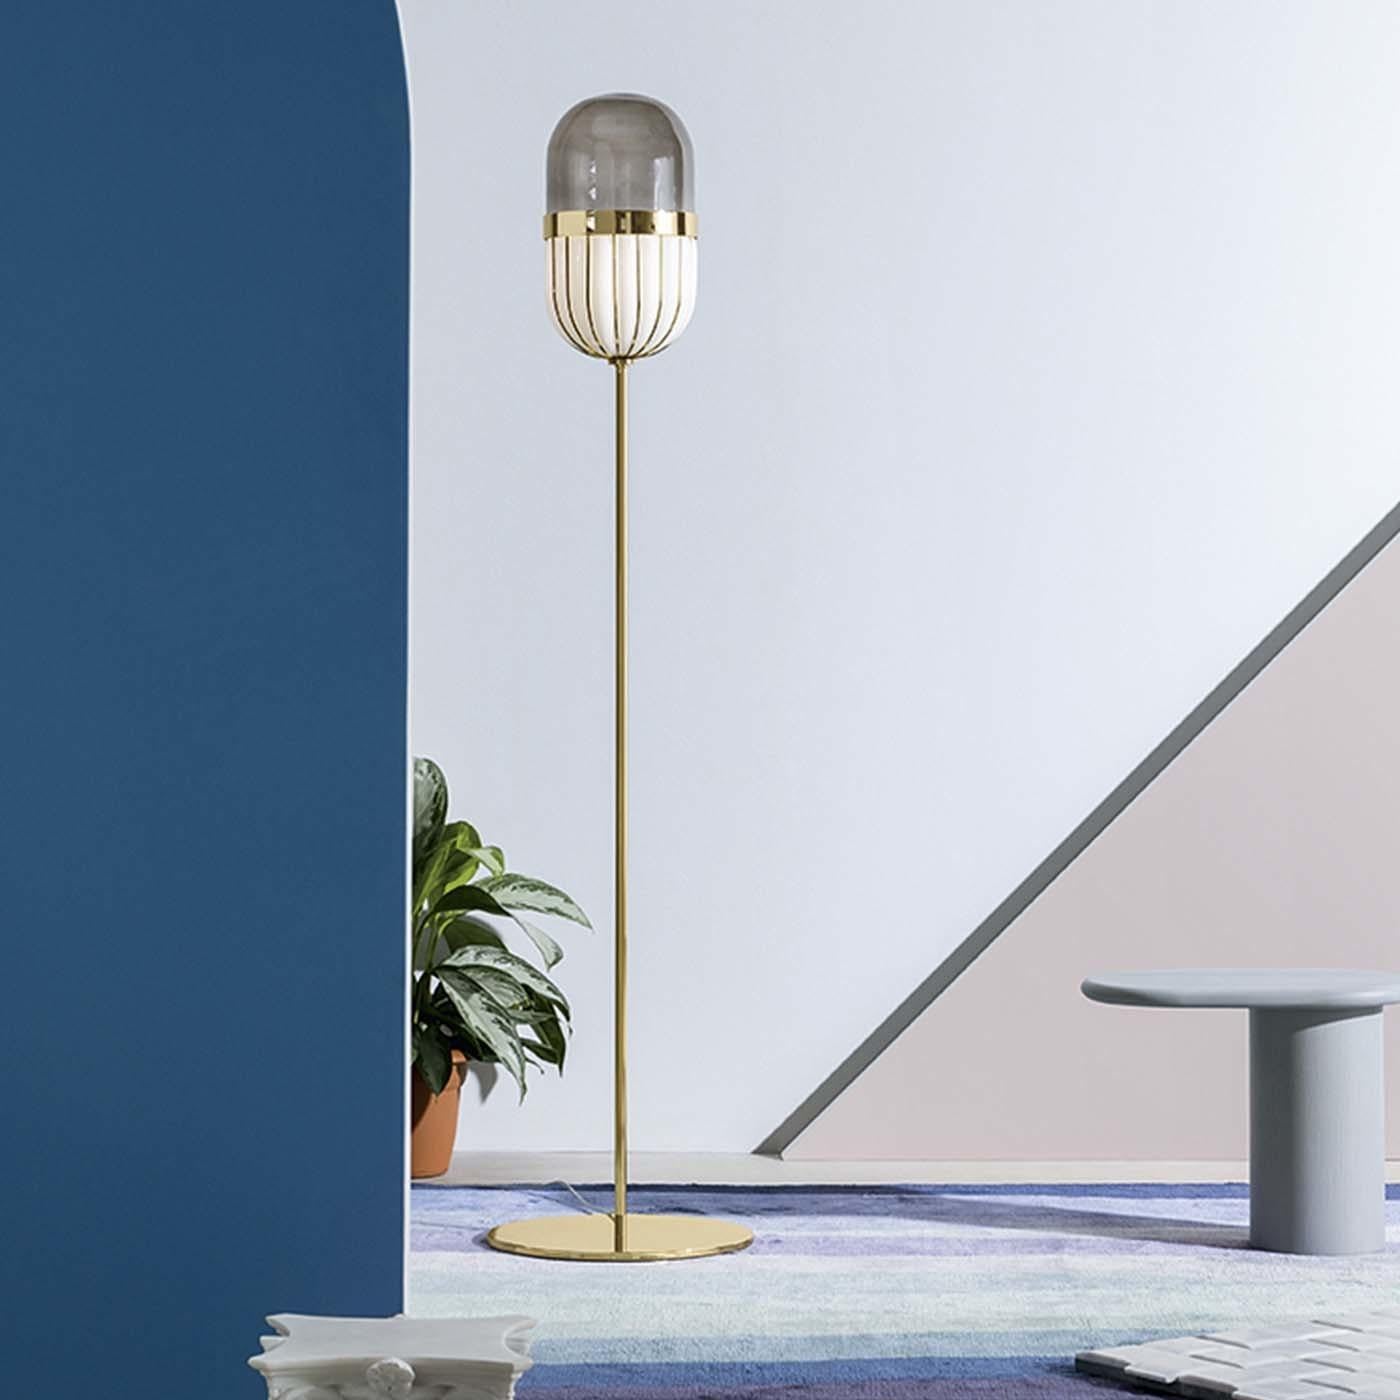 Designed by Matteo Zorzenoni and part of the Pill collection, named after the striking shape of the shade, this floor lamp is an elegant object of functional decor that will imbue with sophistication a modern interior. The metal structure with a